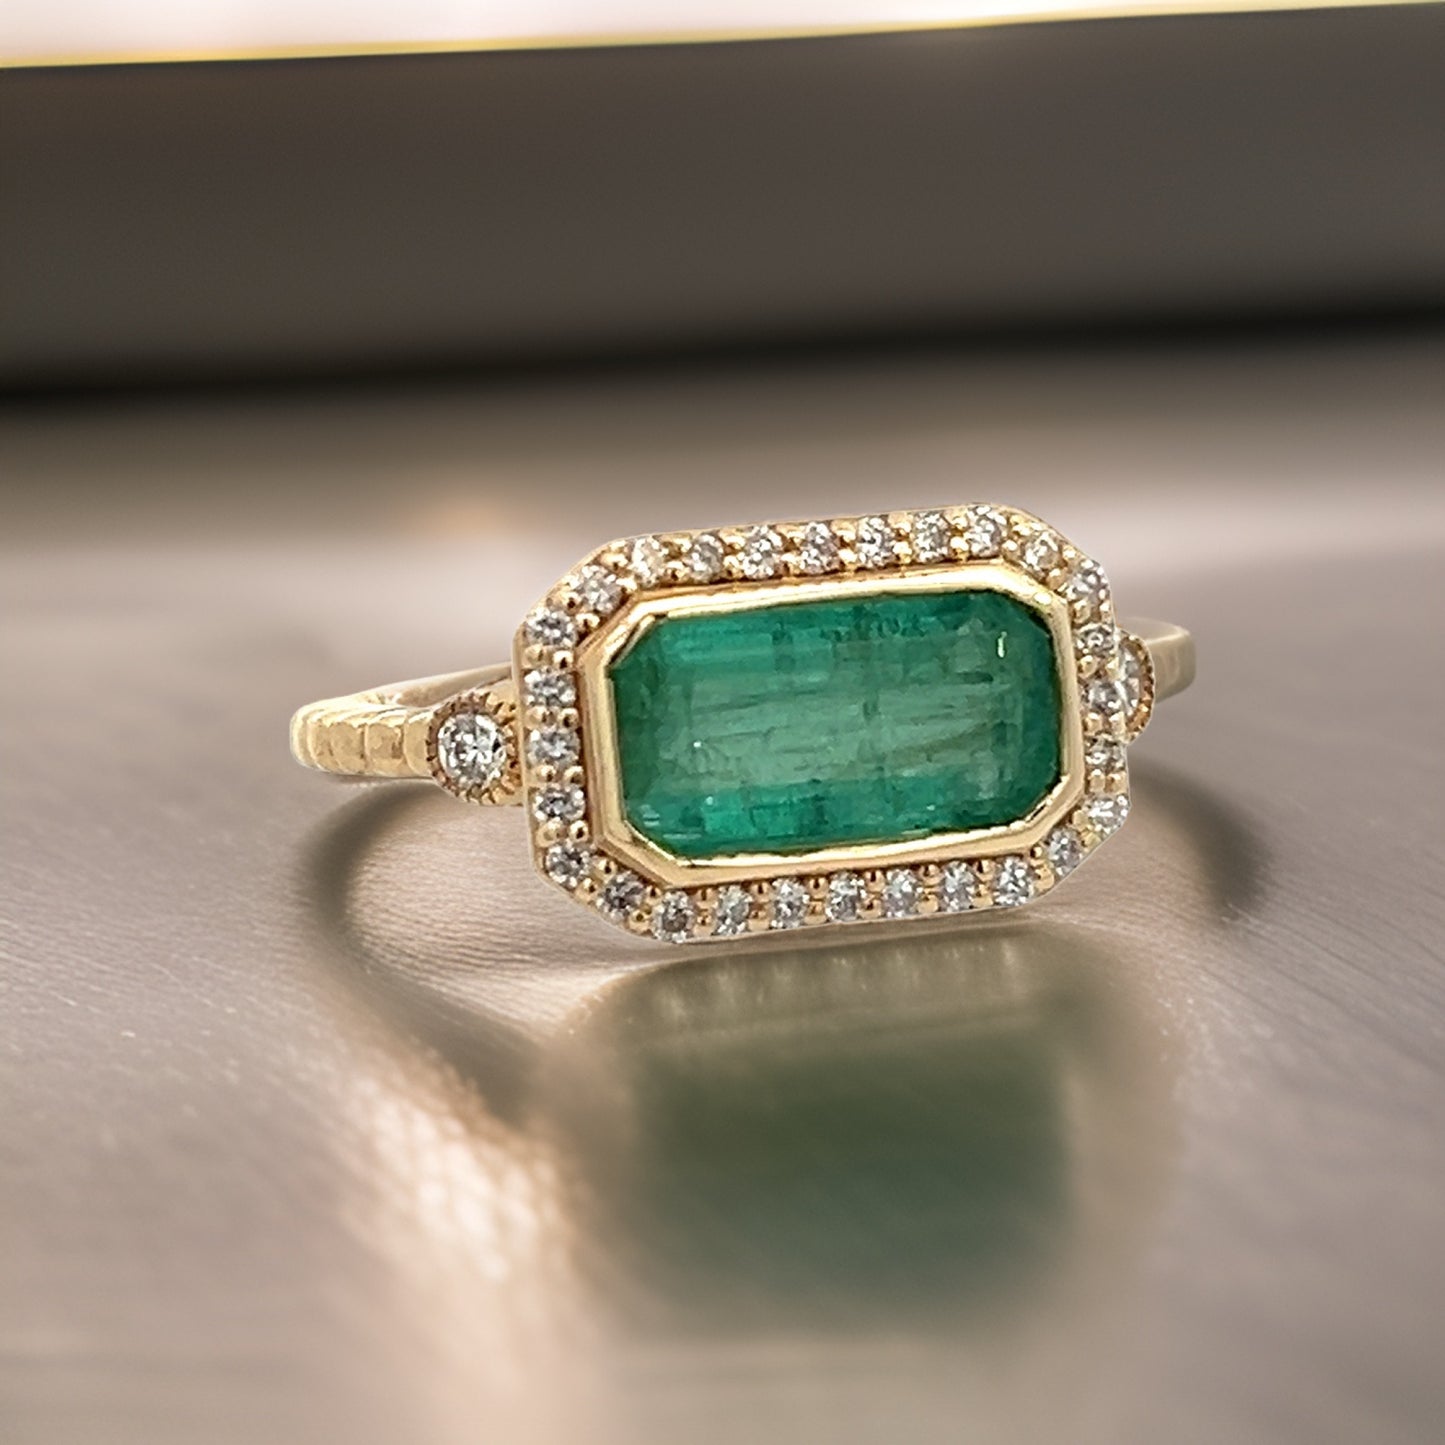 Natural Emerald and Diamond Ring 6.5 14k Y Gold 2.32 TCW Certified $4,950 310644